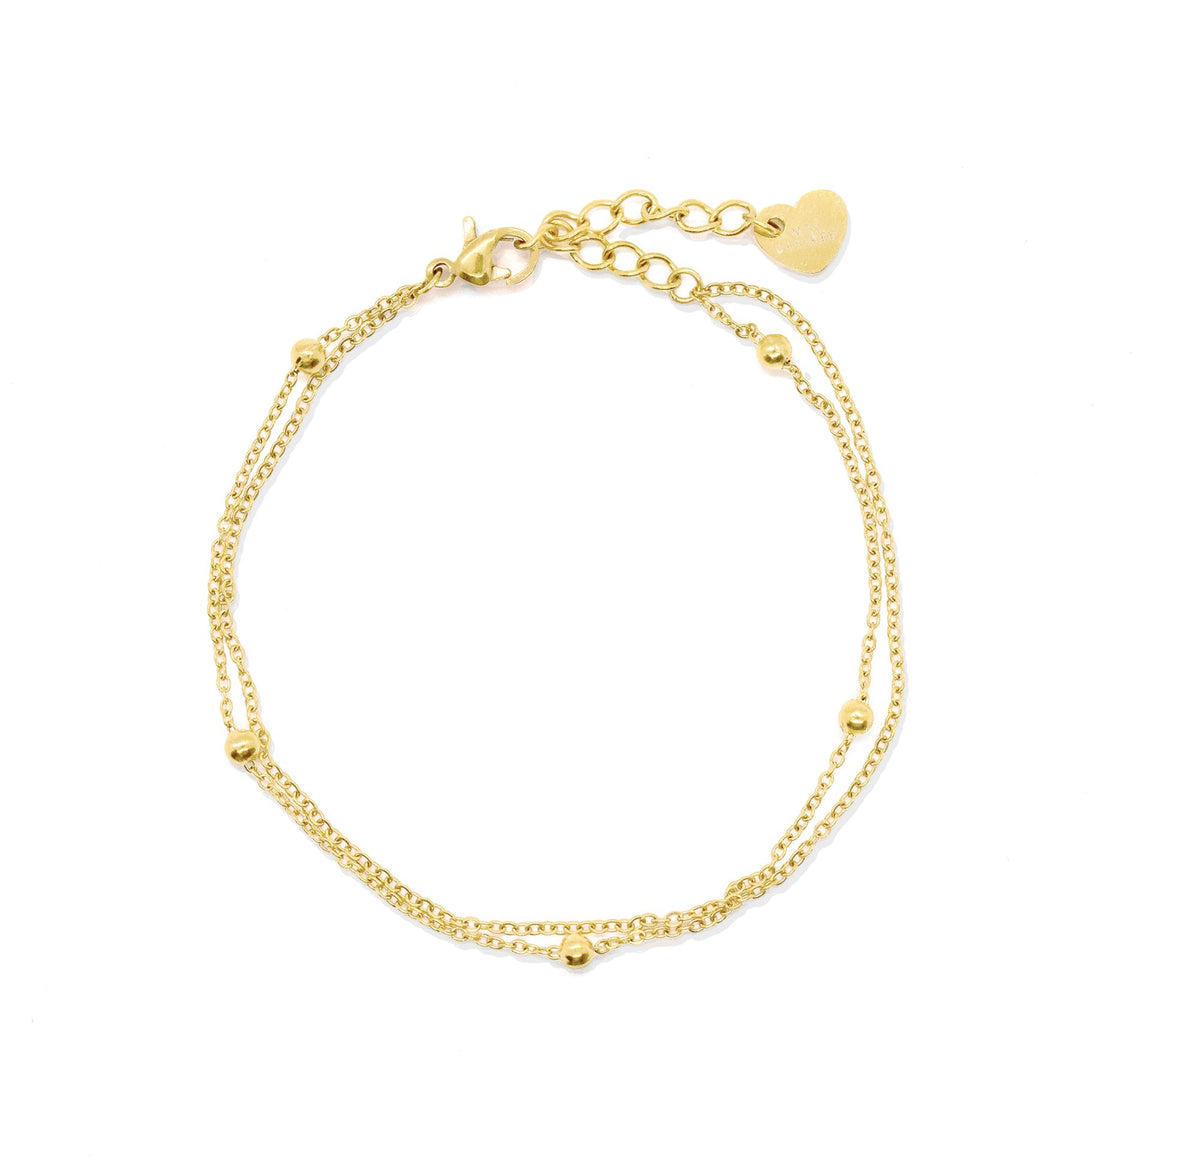 EVER DAINTY GOLD DOUBLE CHAIN BRACELET